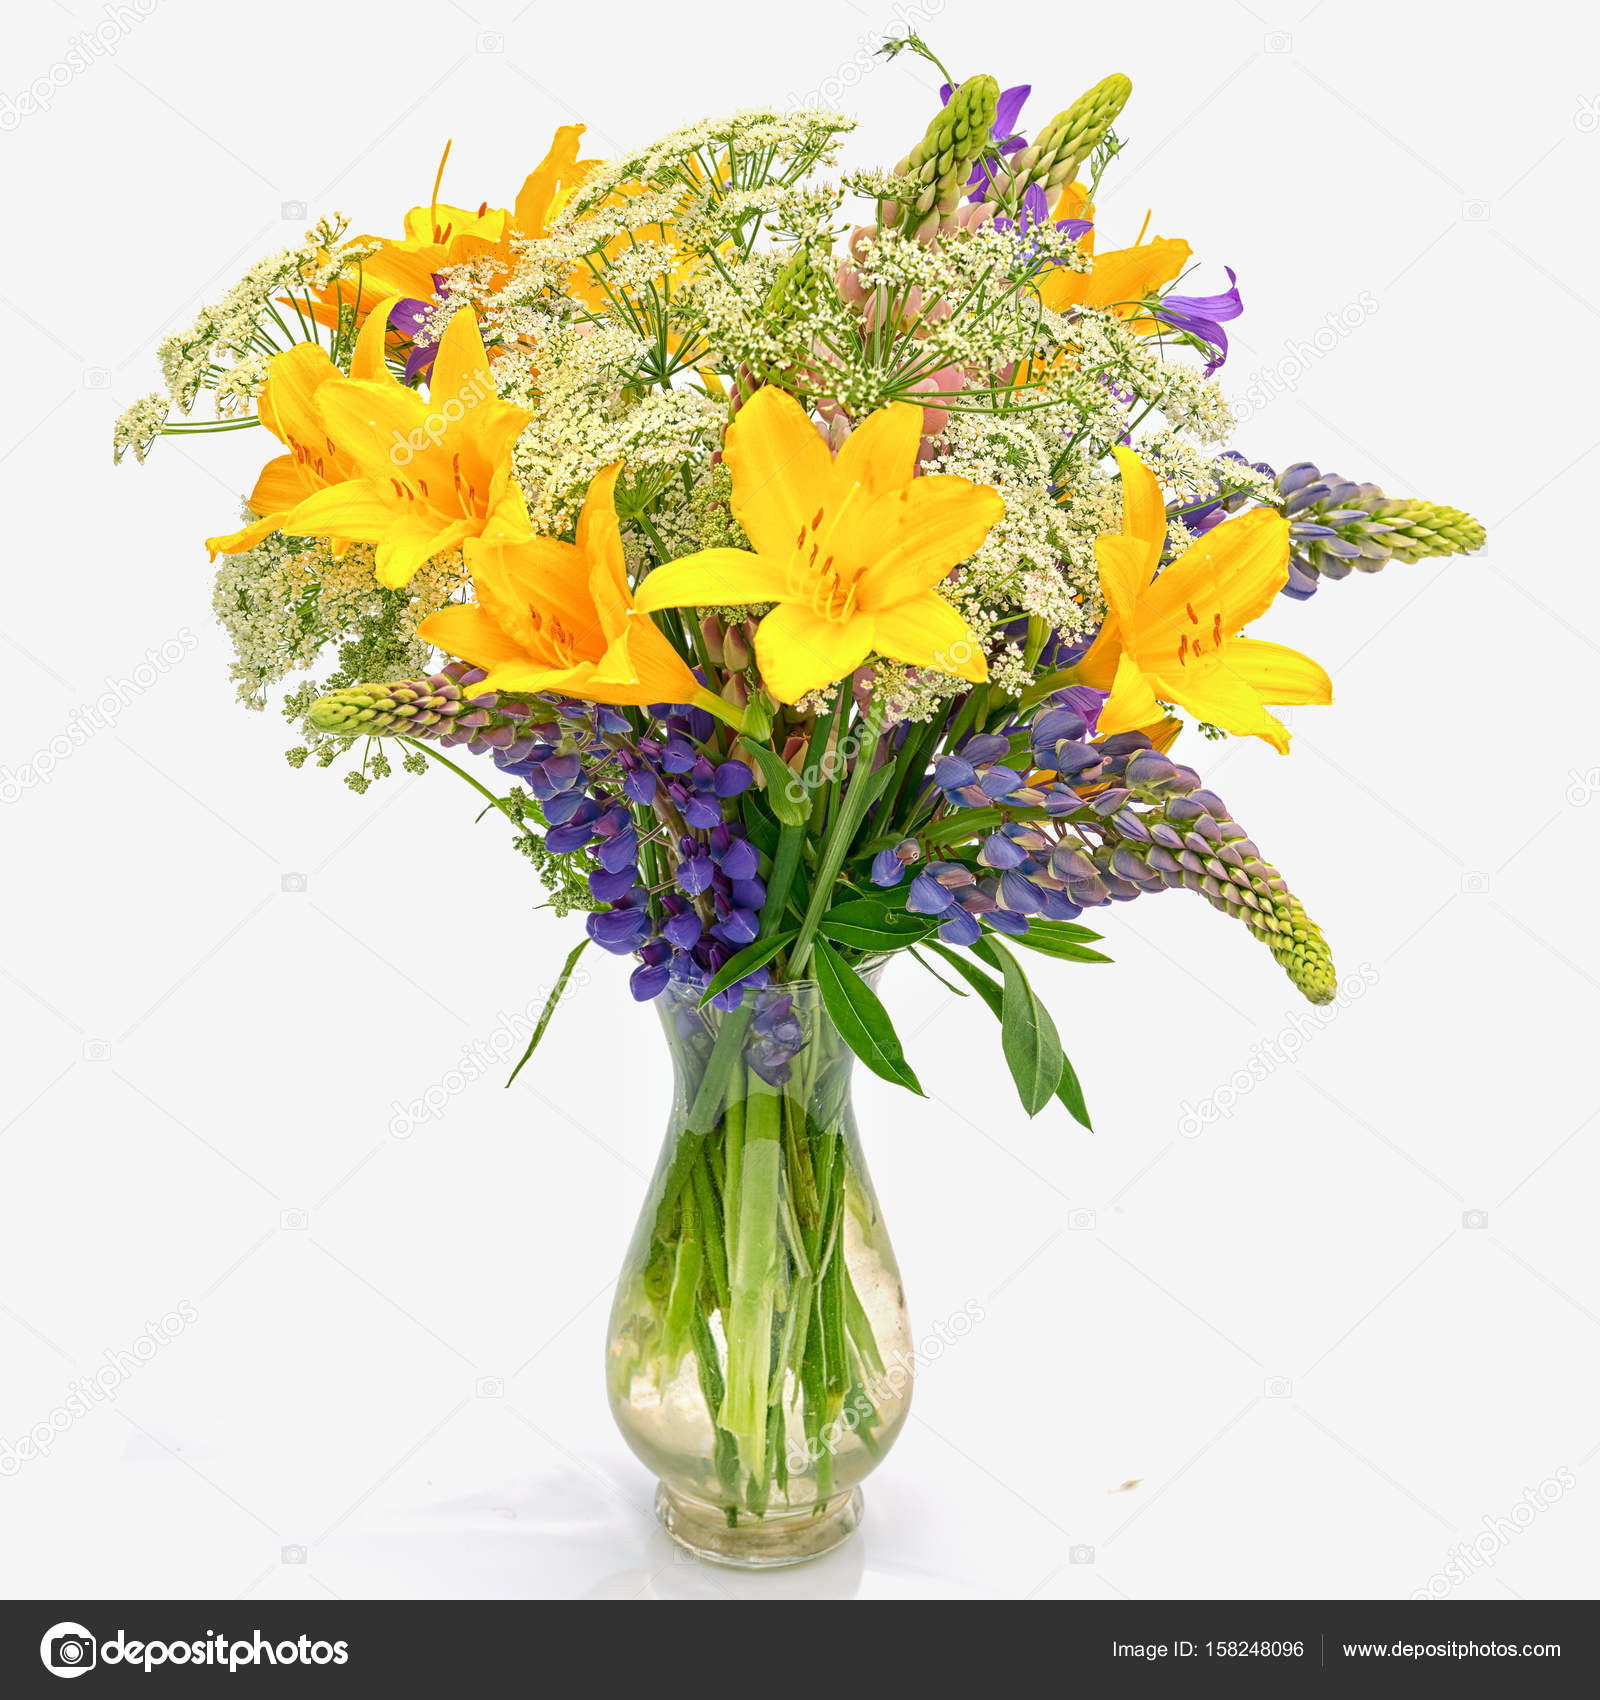 20 Cute Wild Flowers In Vase 2024 free download wild flowers in vase of yellow flower vase gallery bouquet od wild flowers achillea with yellow flower vase gallery bouquet od wild flowers achillea millefolium day lily and lupine of yellow